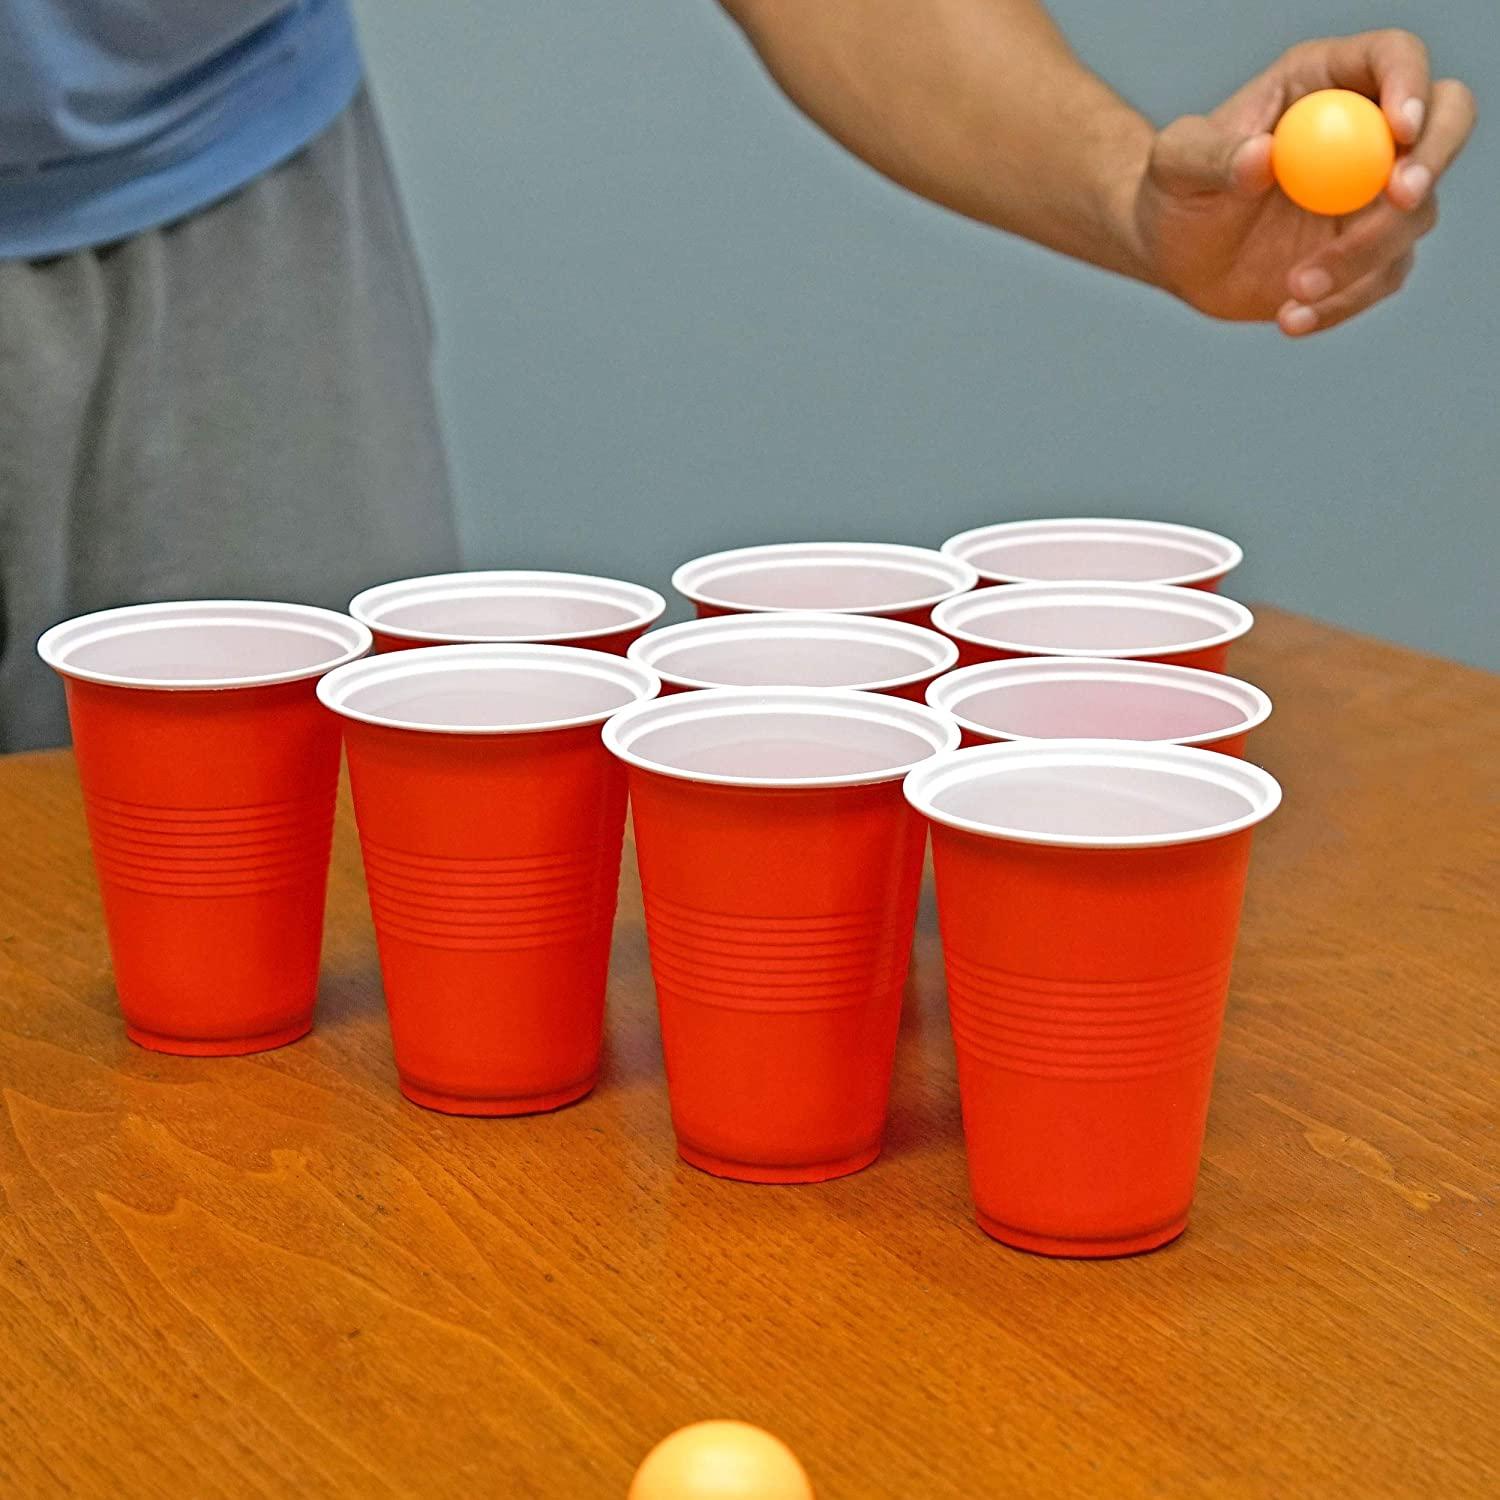 Personalized Beer Pong Cup- great birthday gift